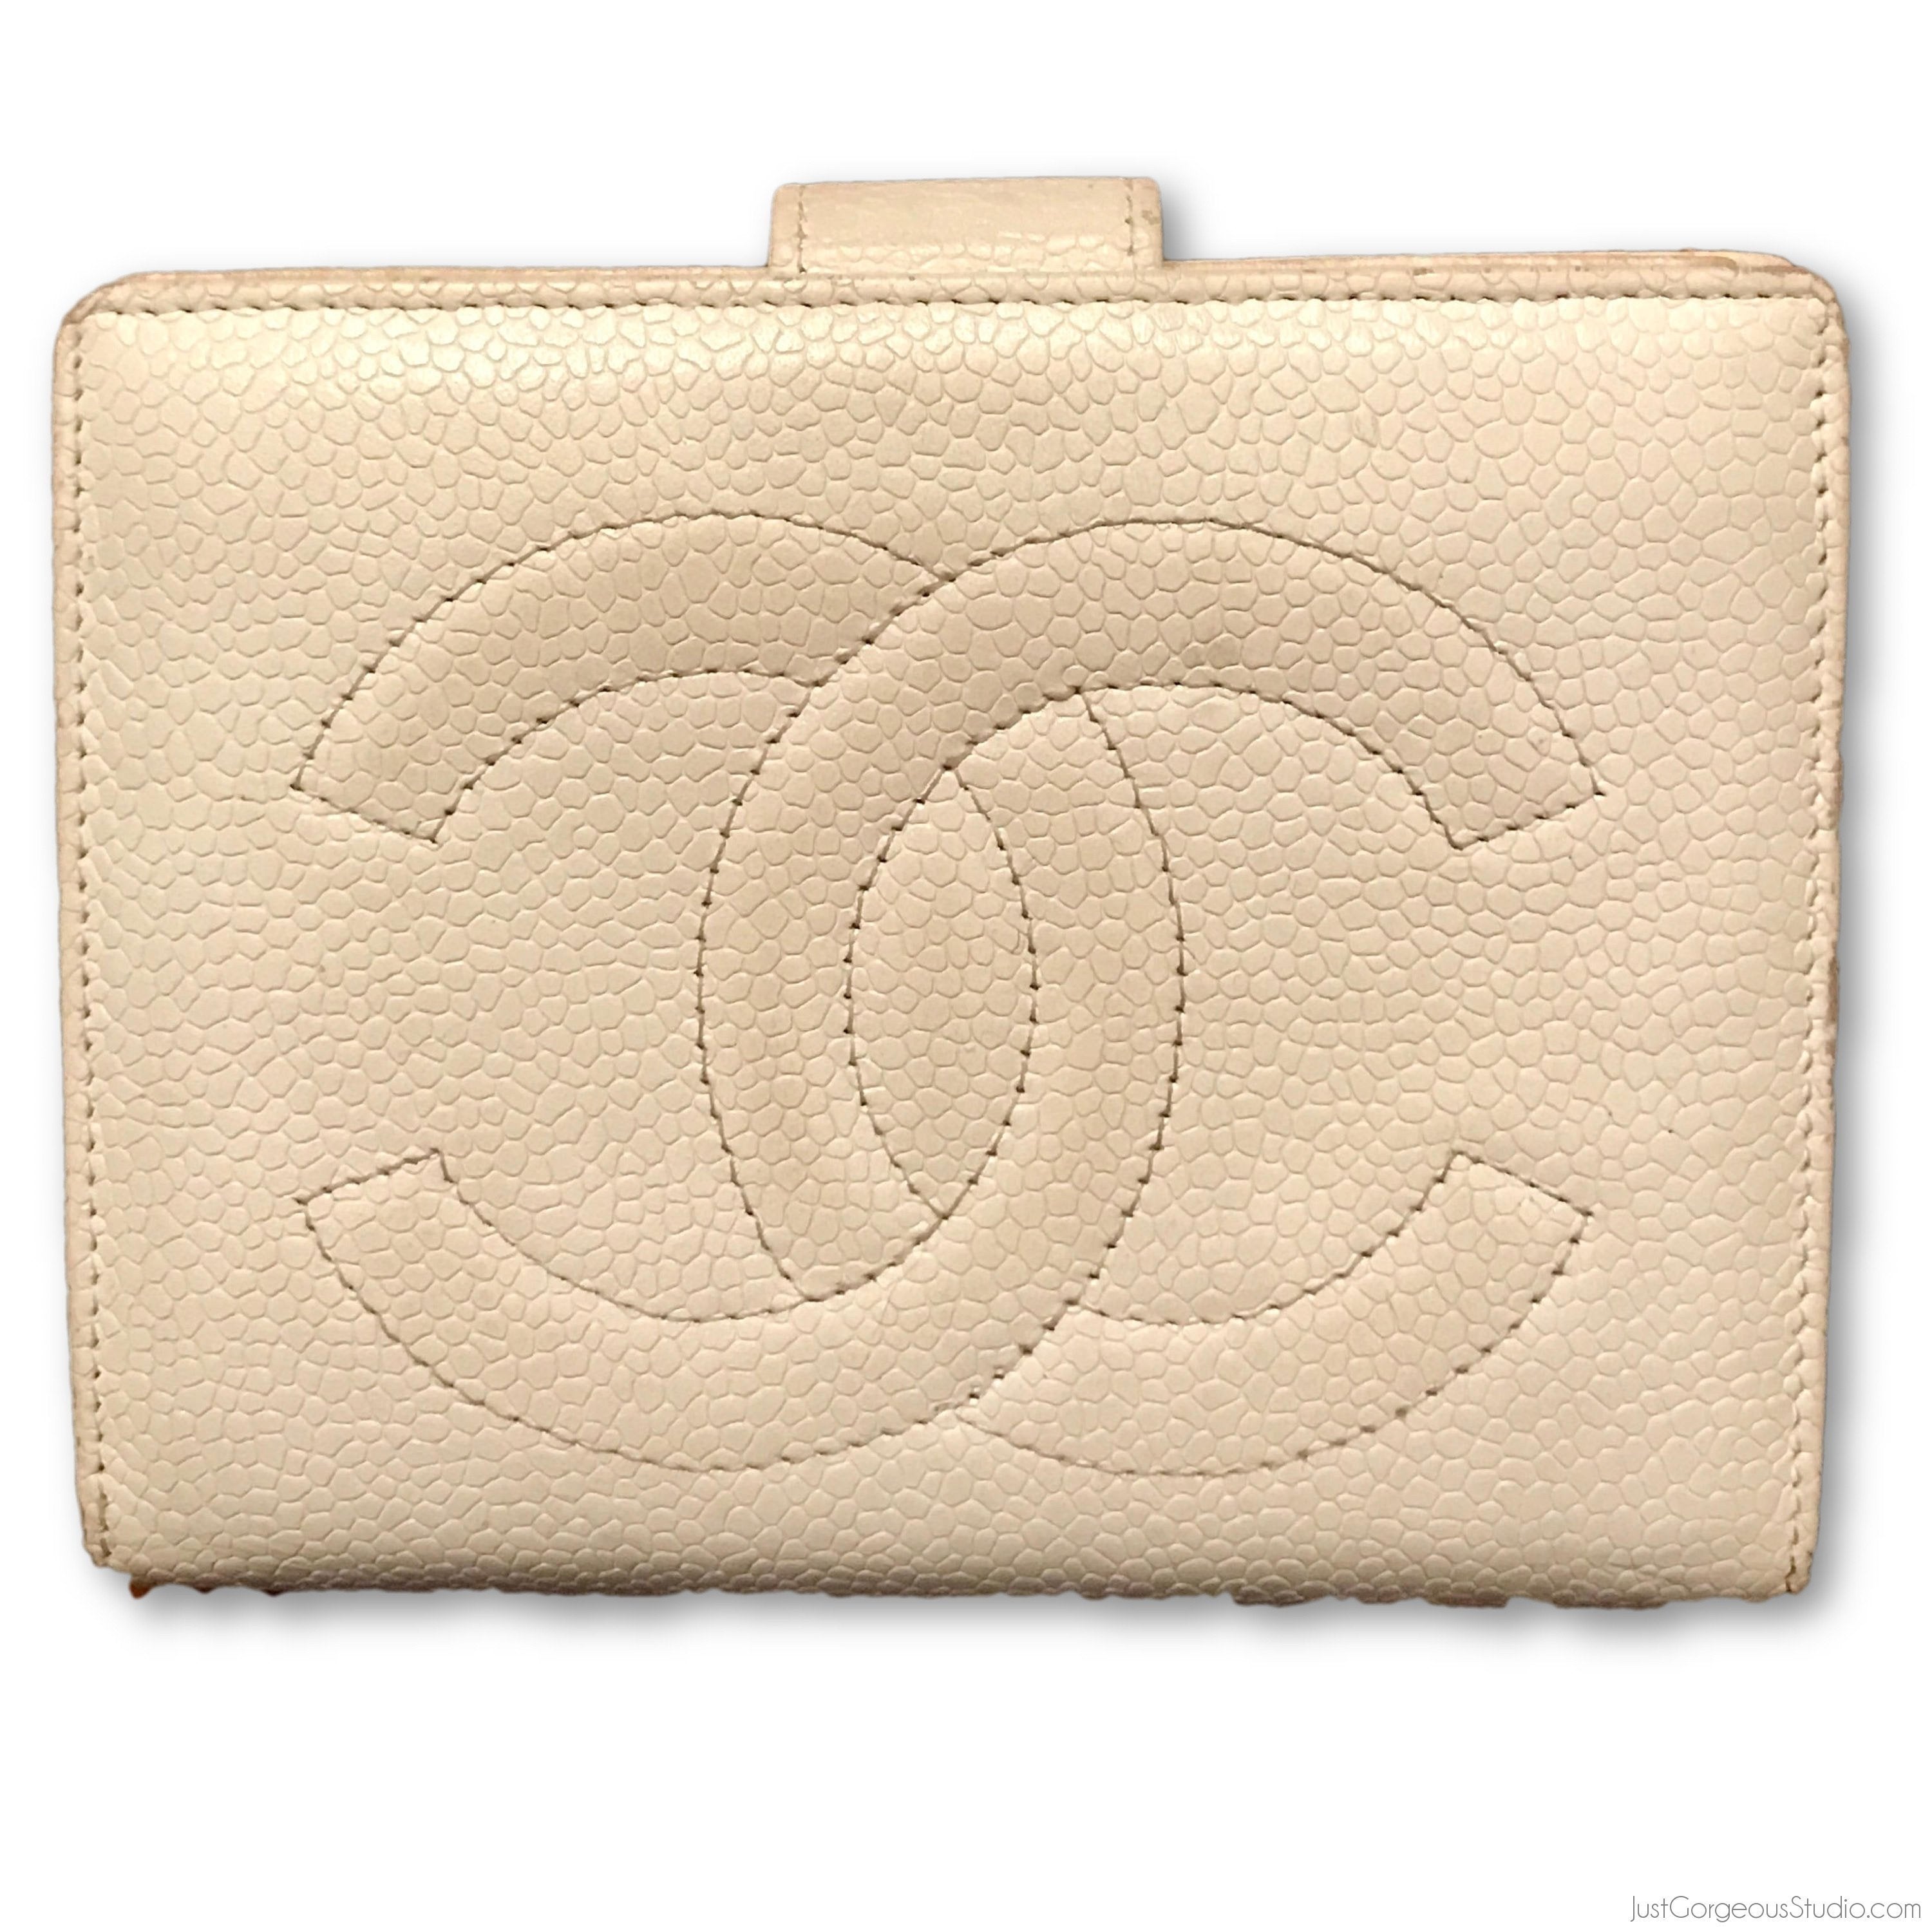 CHANEL Caviar Leather Long Wallet